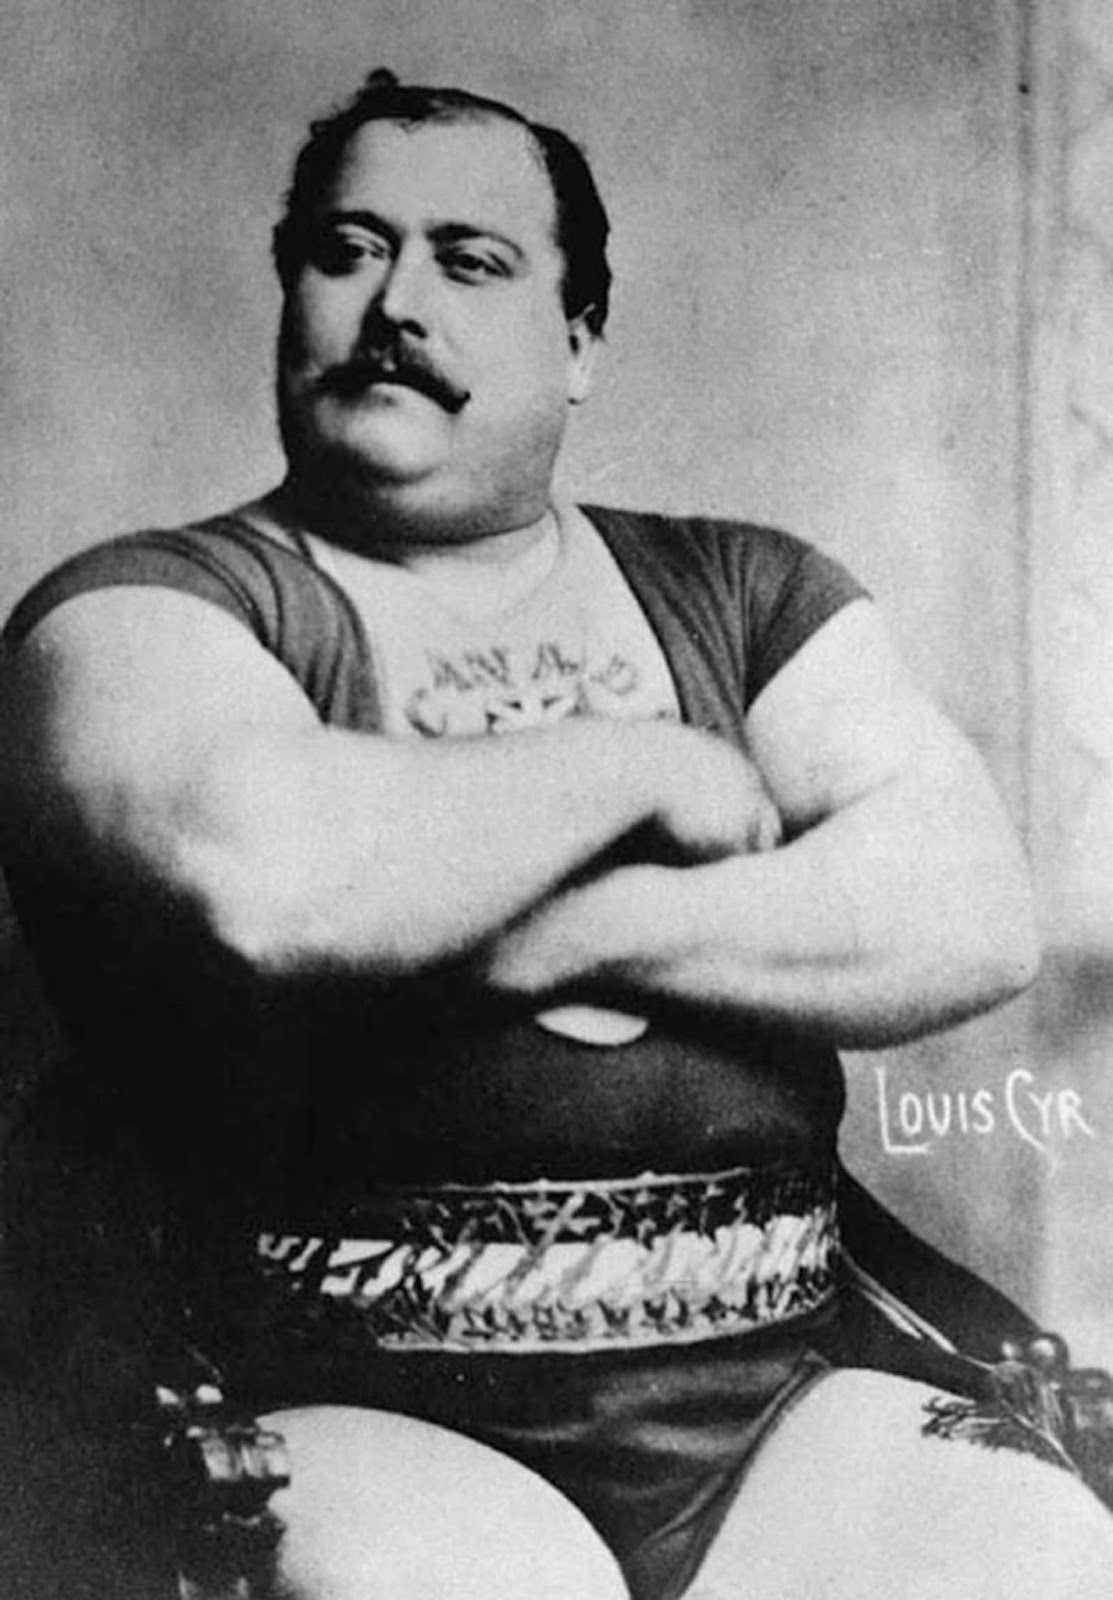 Louis Cyr, circa 1900. His recorded feats include: lifting 500 pounds (227 kg) with one finger and backlifting 4,337 pounds (1,967 kg).